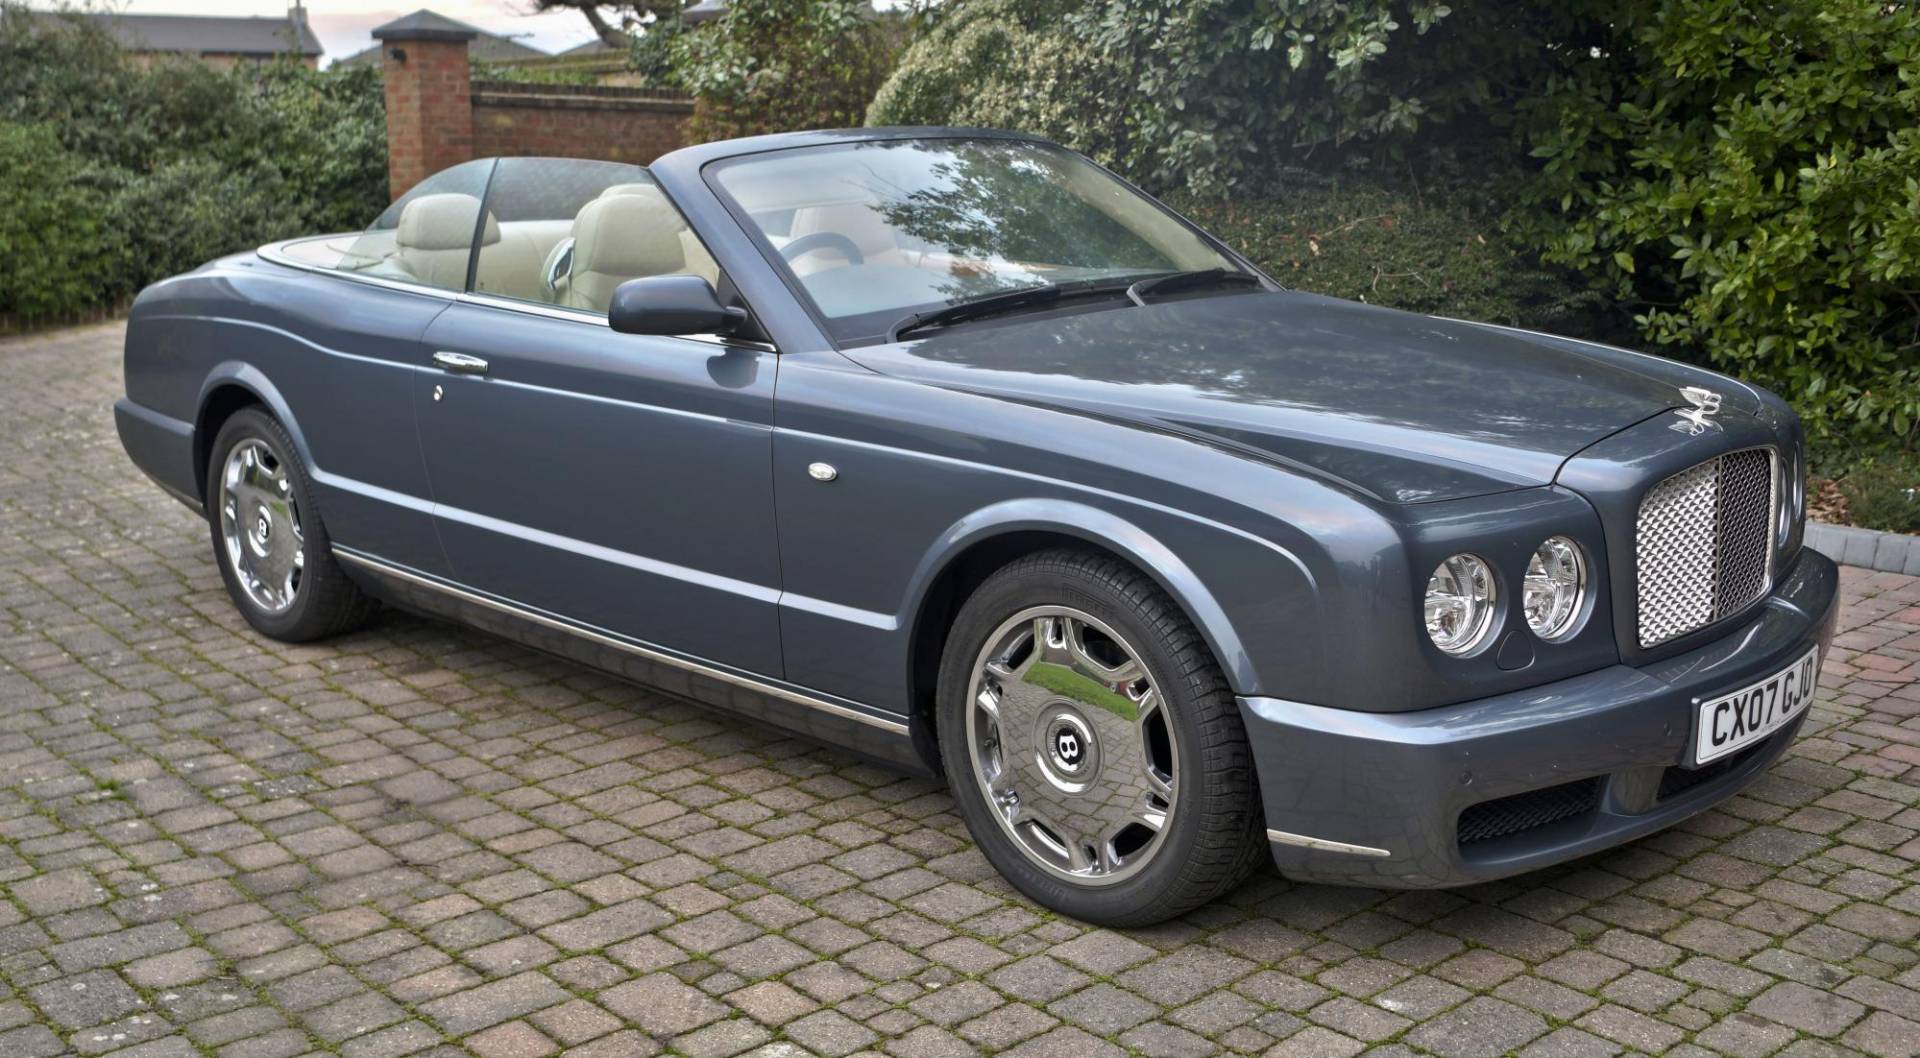 For Sale: Bentley Azure (2007) offered for £163,288